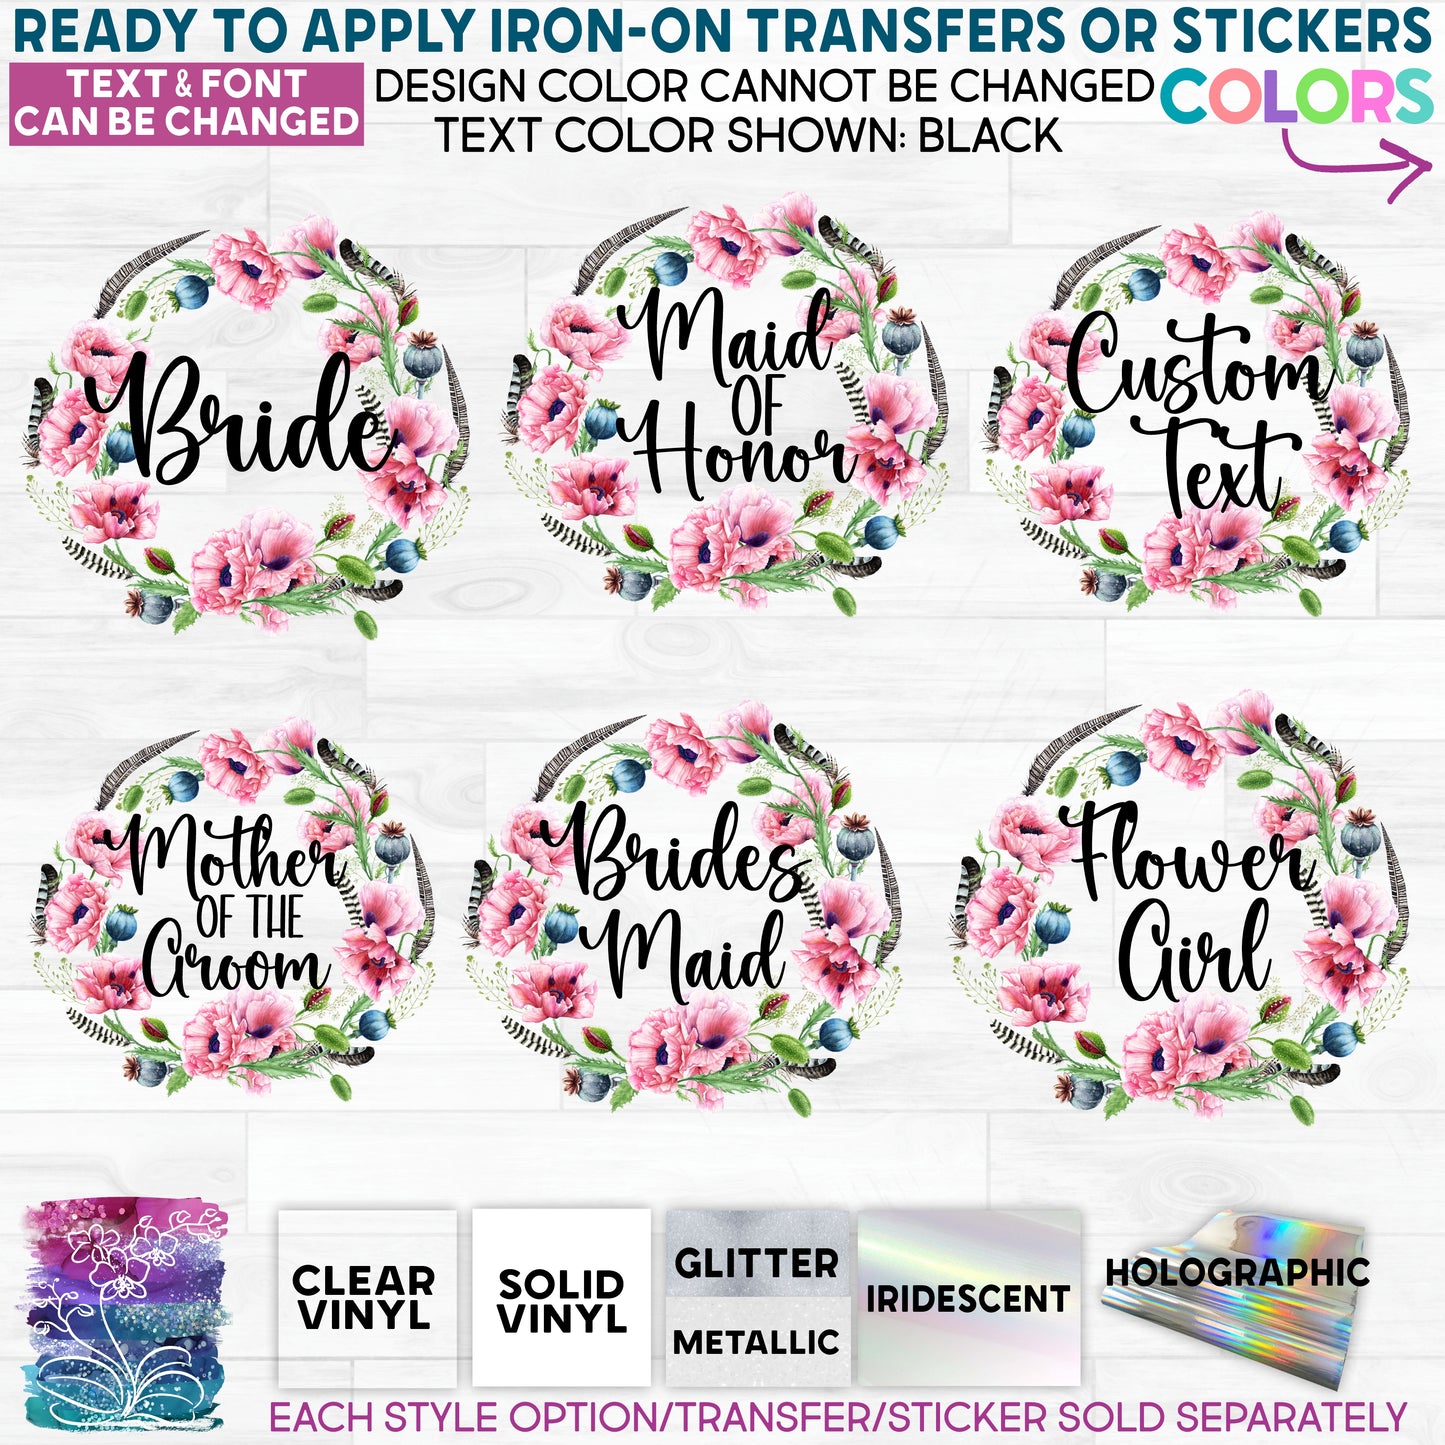 (s205-2) Bridal Wedding Party Pink Poppy Poppies Floral Flowers Watercolor Glitter or Vinyl Iron-On Transfer or Sticker